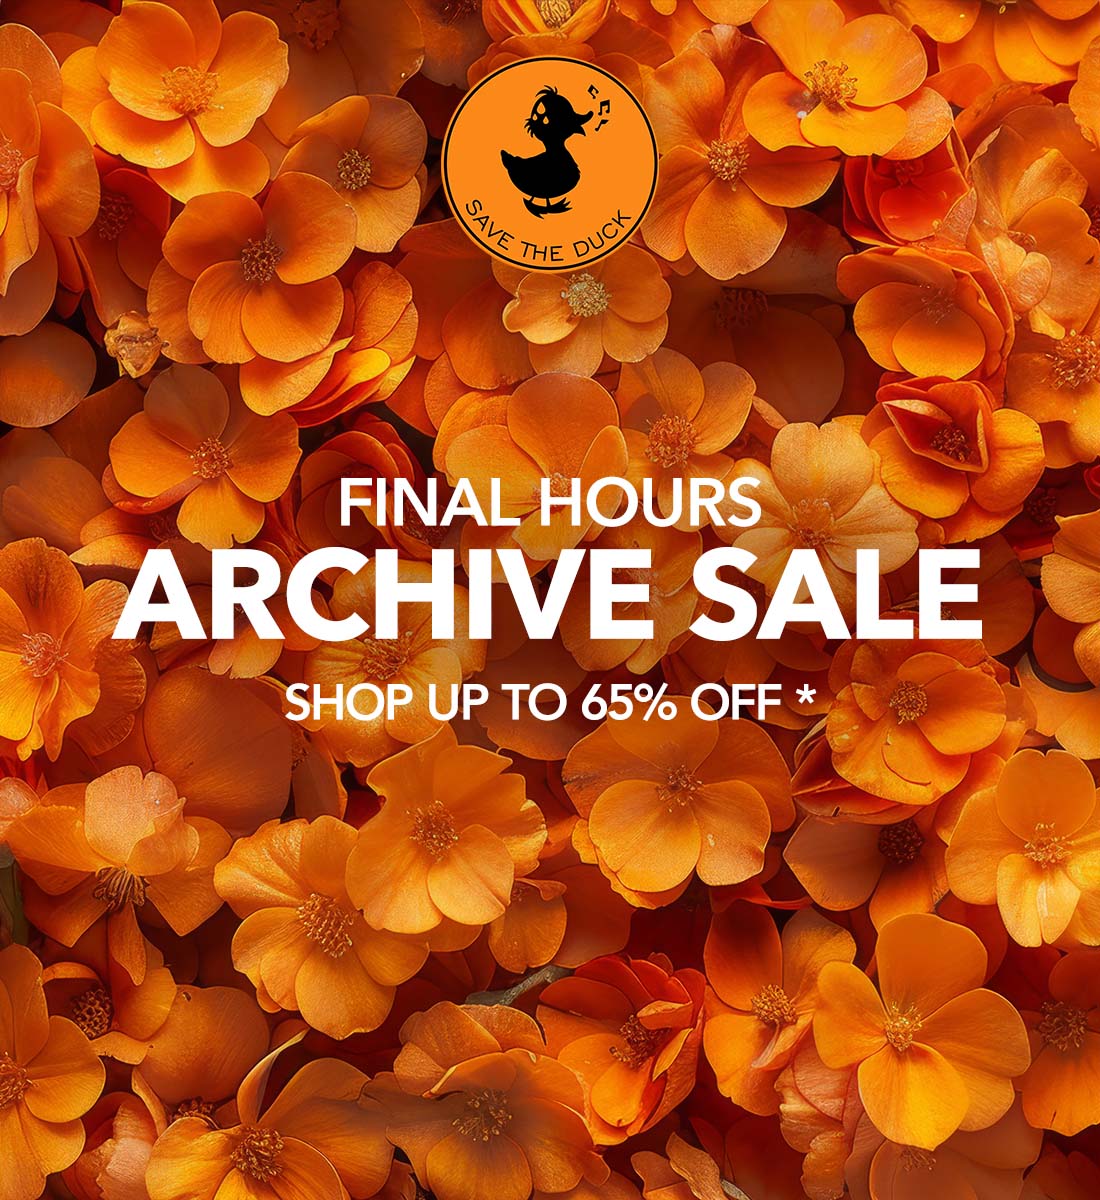 Final hours of the archive sale! 